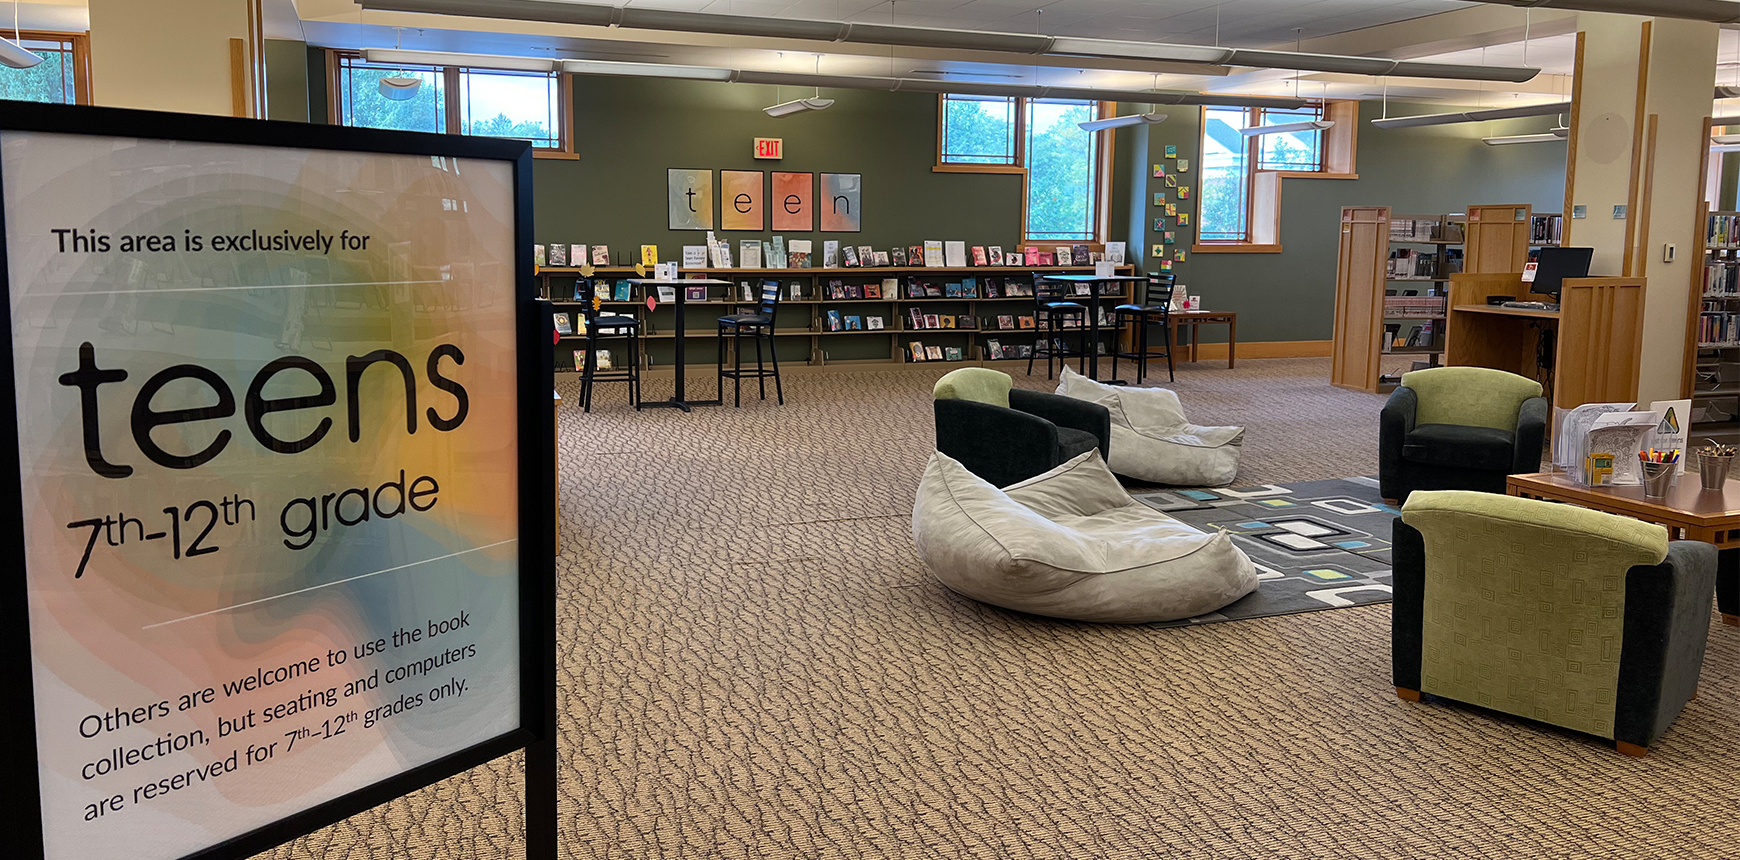 Photo of the Teen Scene, showing the hangout space with beanbag chairs and tables, and teen books and audiobooks